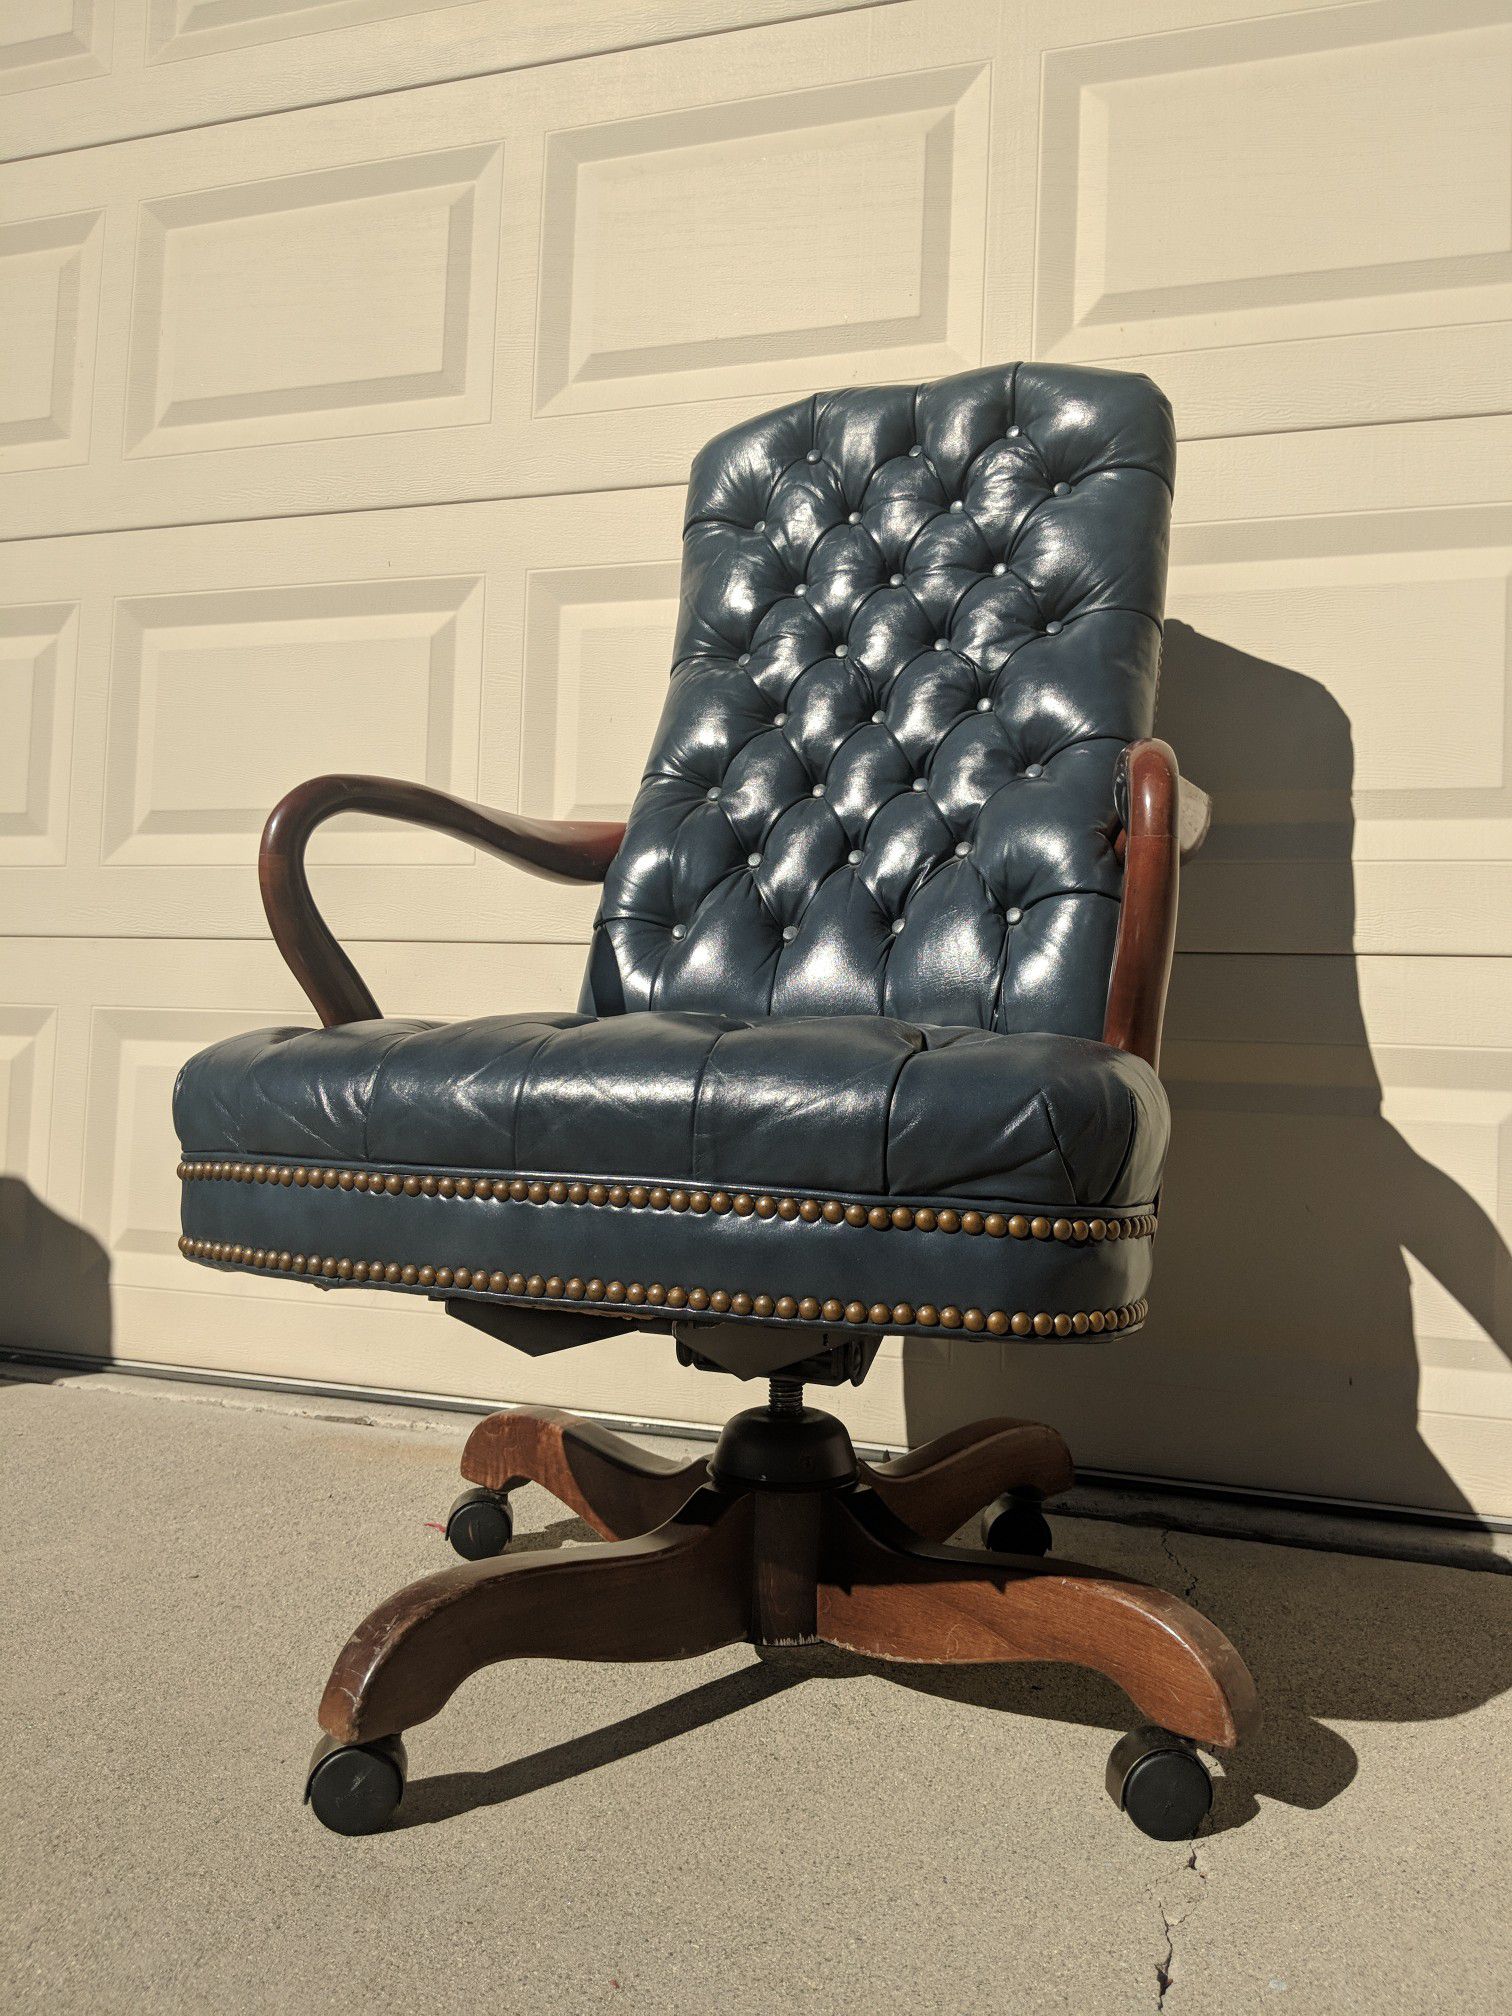 Traditional tufted leather midcentury conference chairs